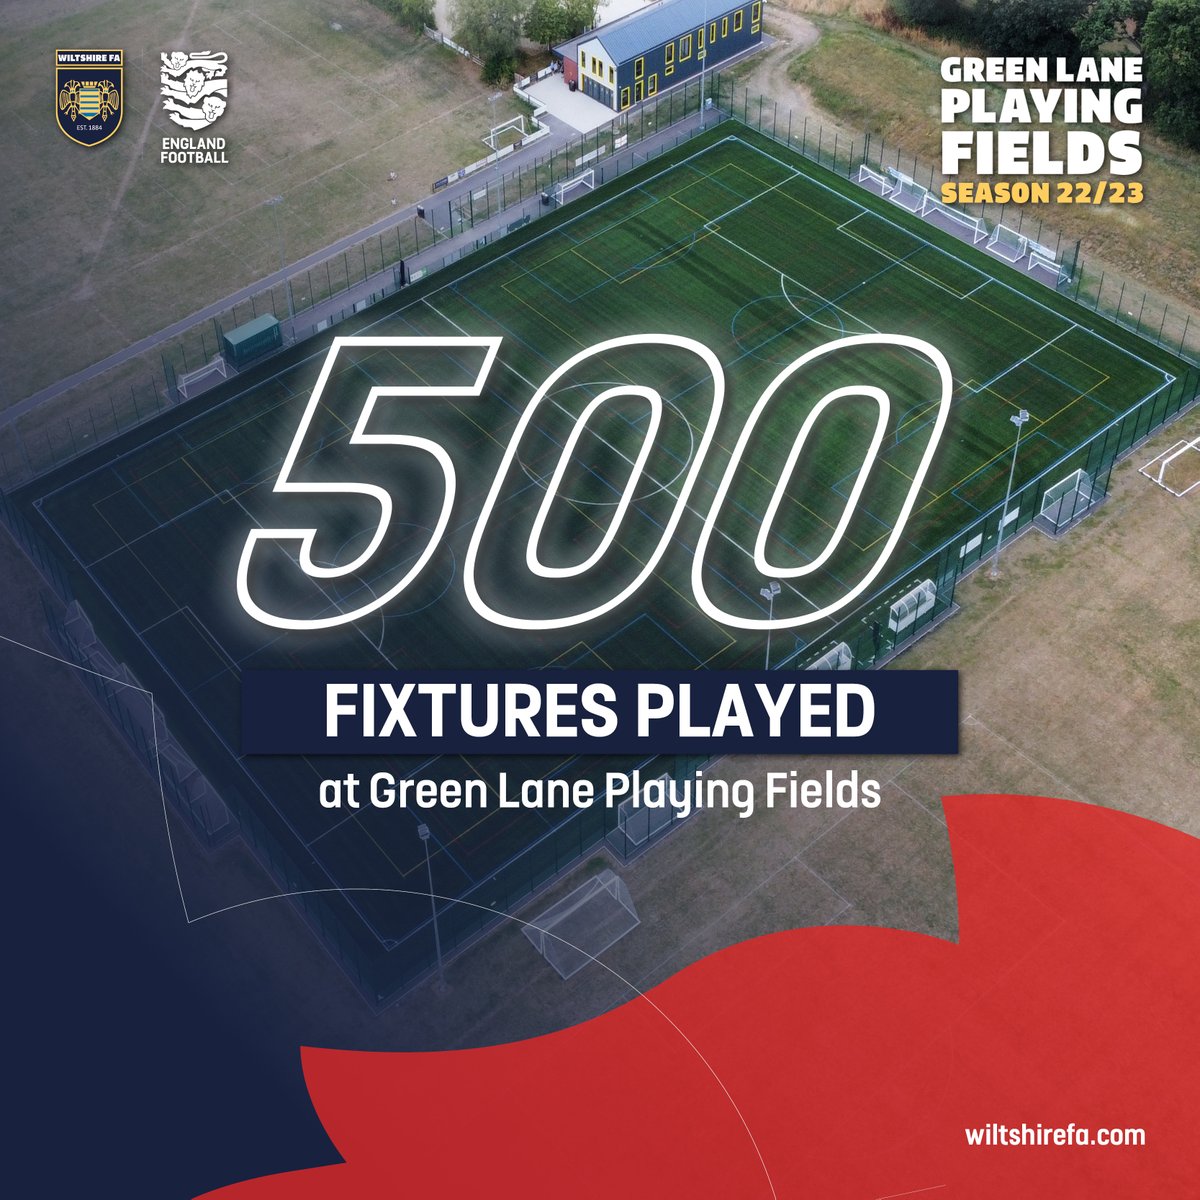 🎉We are celebrating a milestone moment!

We have recently recorded our 5️⃣0️⃣0️⃣th fixture played this season at @GreenLanePF 

Thanks to everyone who has joined us. 

⚽️Book a pitch with us – wiltshirefa.com/about/faciliti…

#WiltshireFootball #WeAreGreenLanePlayingFields 💚